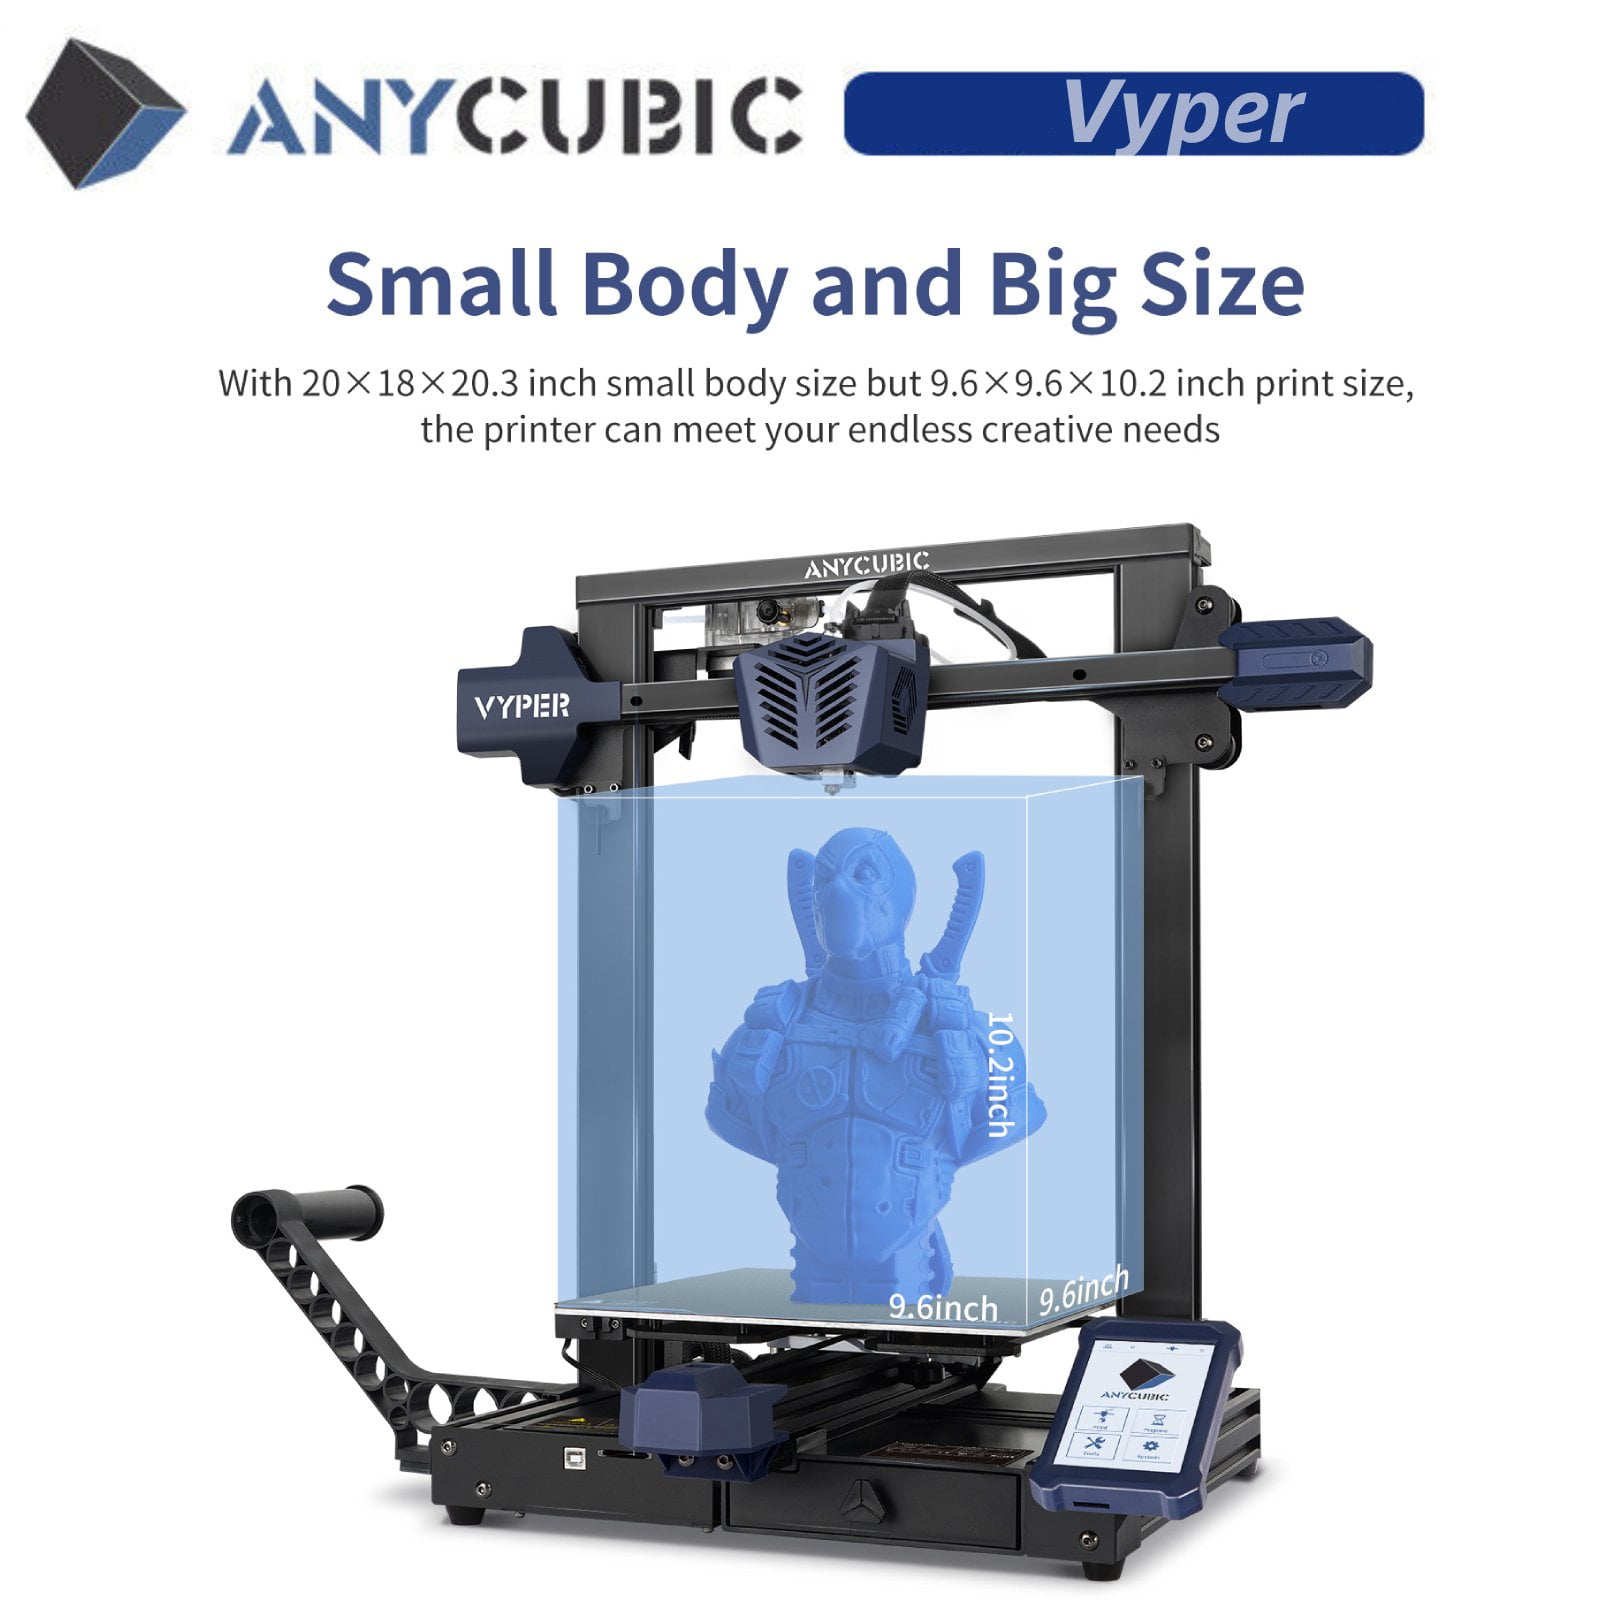 Anycubic Kobra Max Review: Big Printer For People With Big Dreams